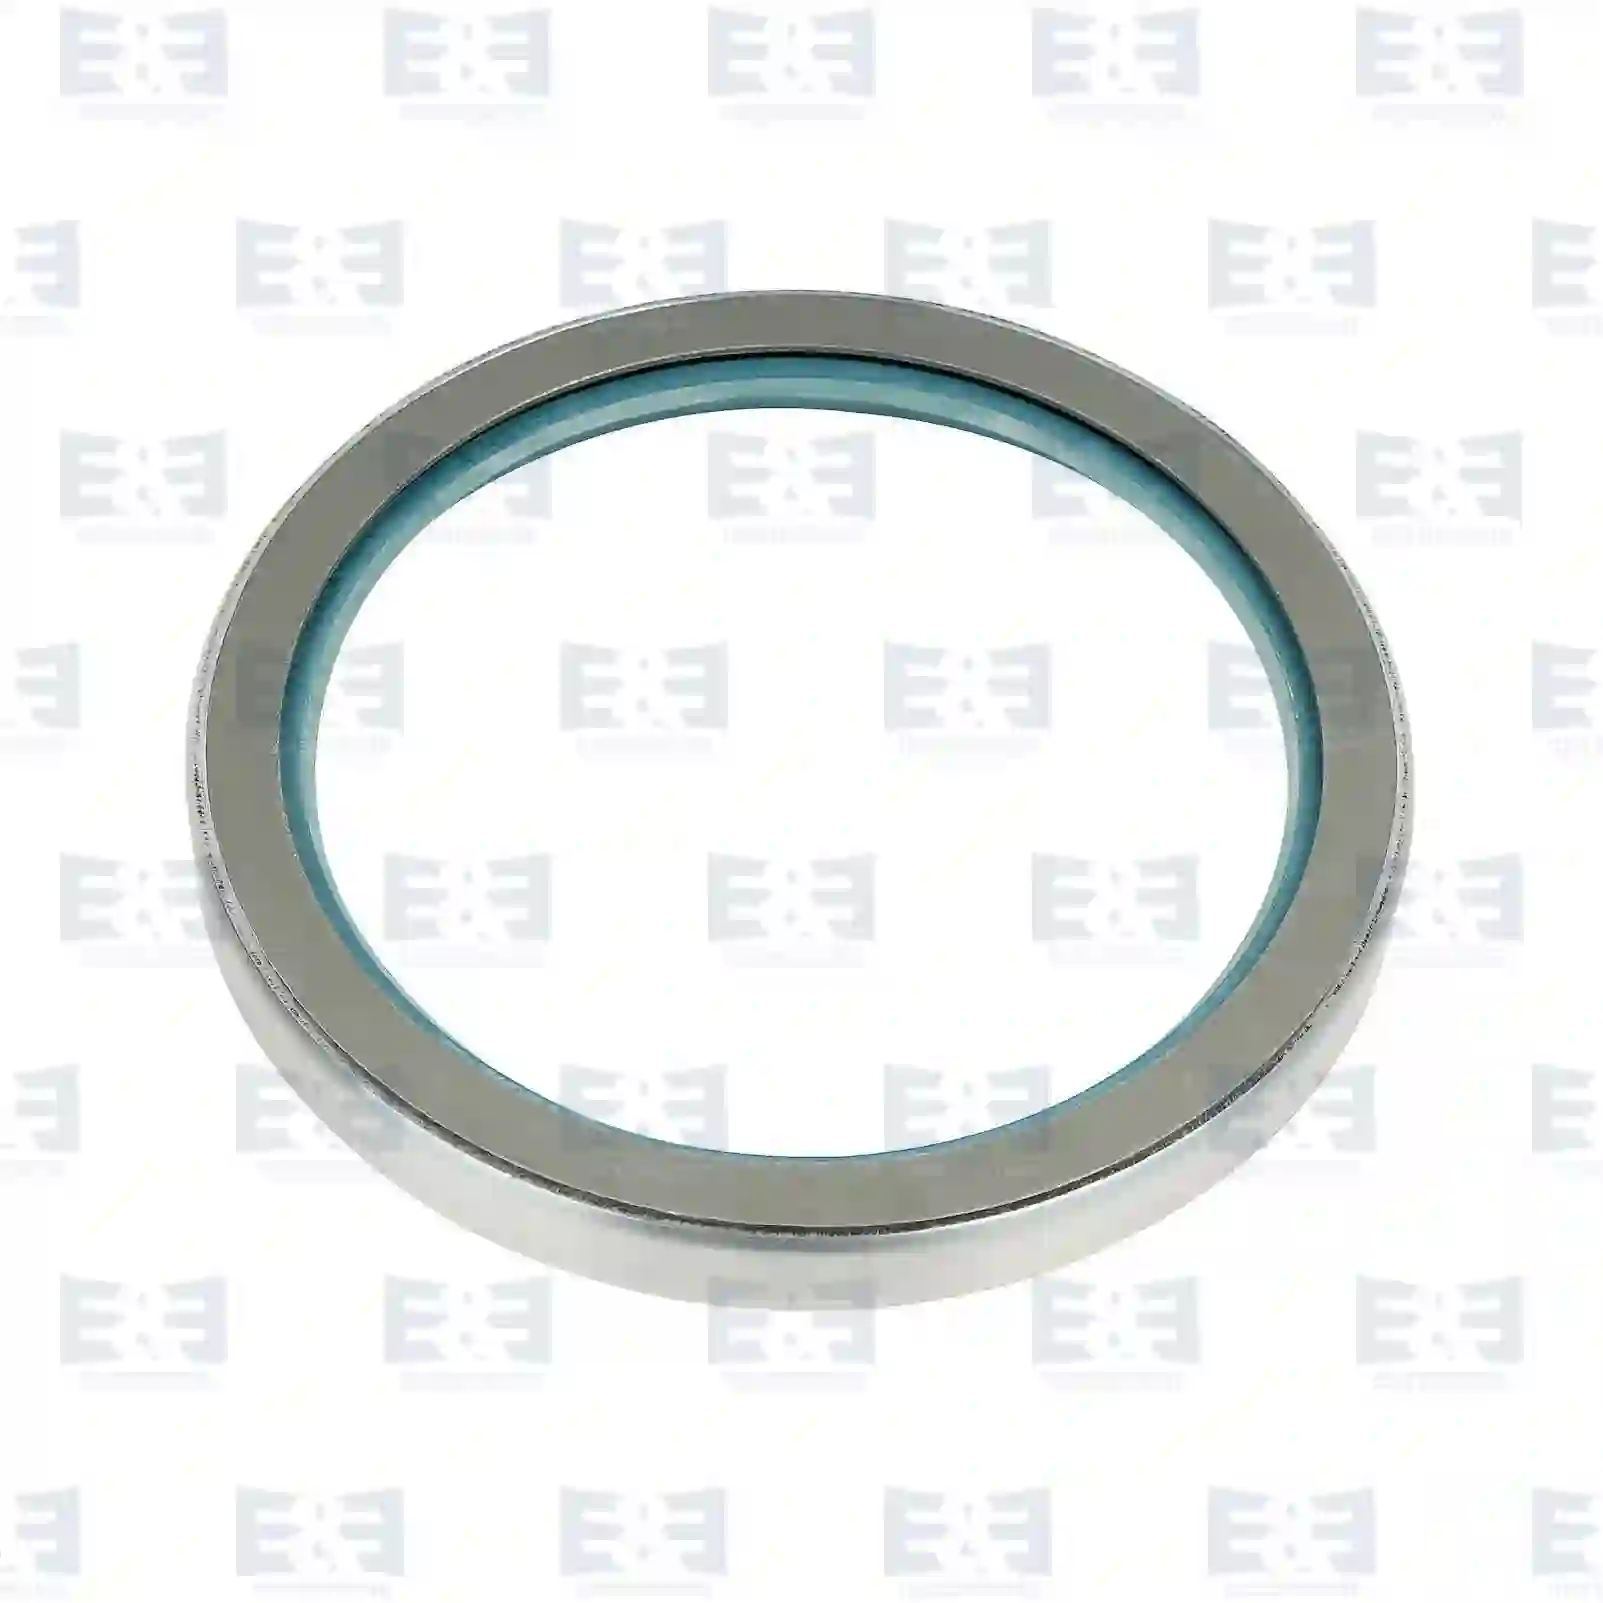 Steering Knuckle Oil seal, EE No 2E2270408 ,  oem no:06562890113, 0009976447, 0039974546, E&E Truck Spare Parts | Truck Spare Parts, Auotomotive Spare Parts